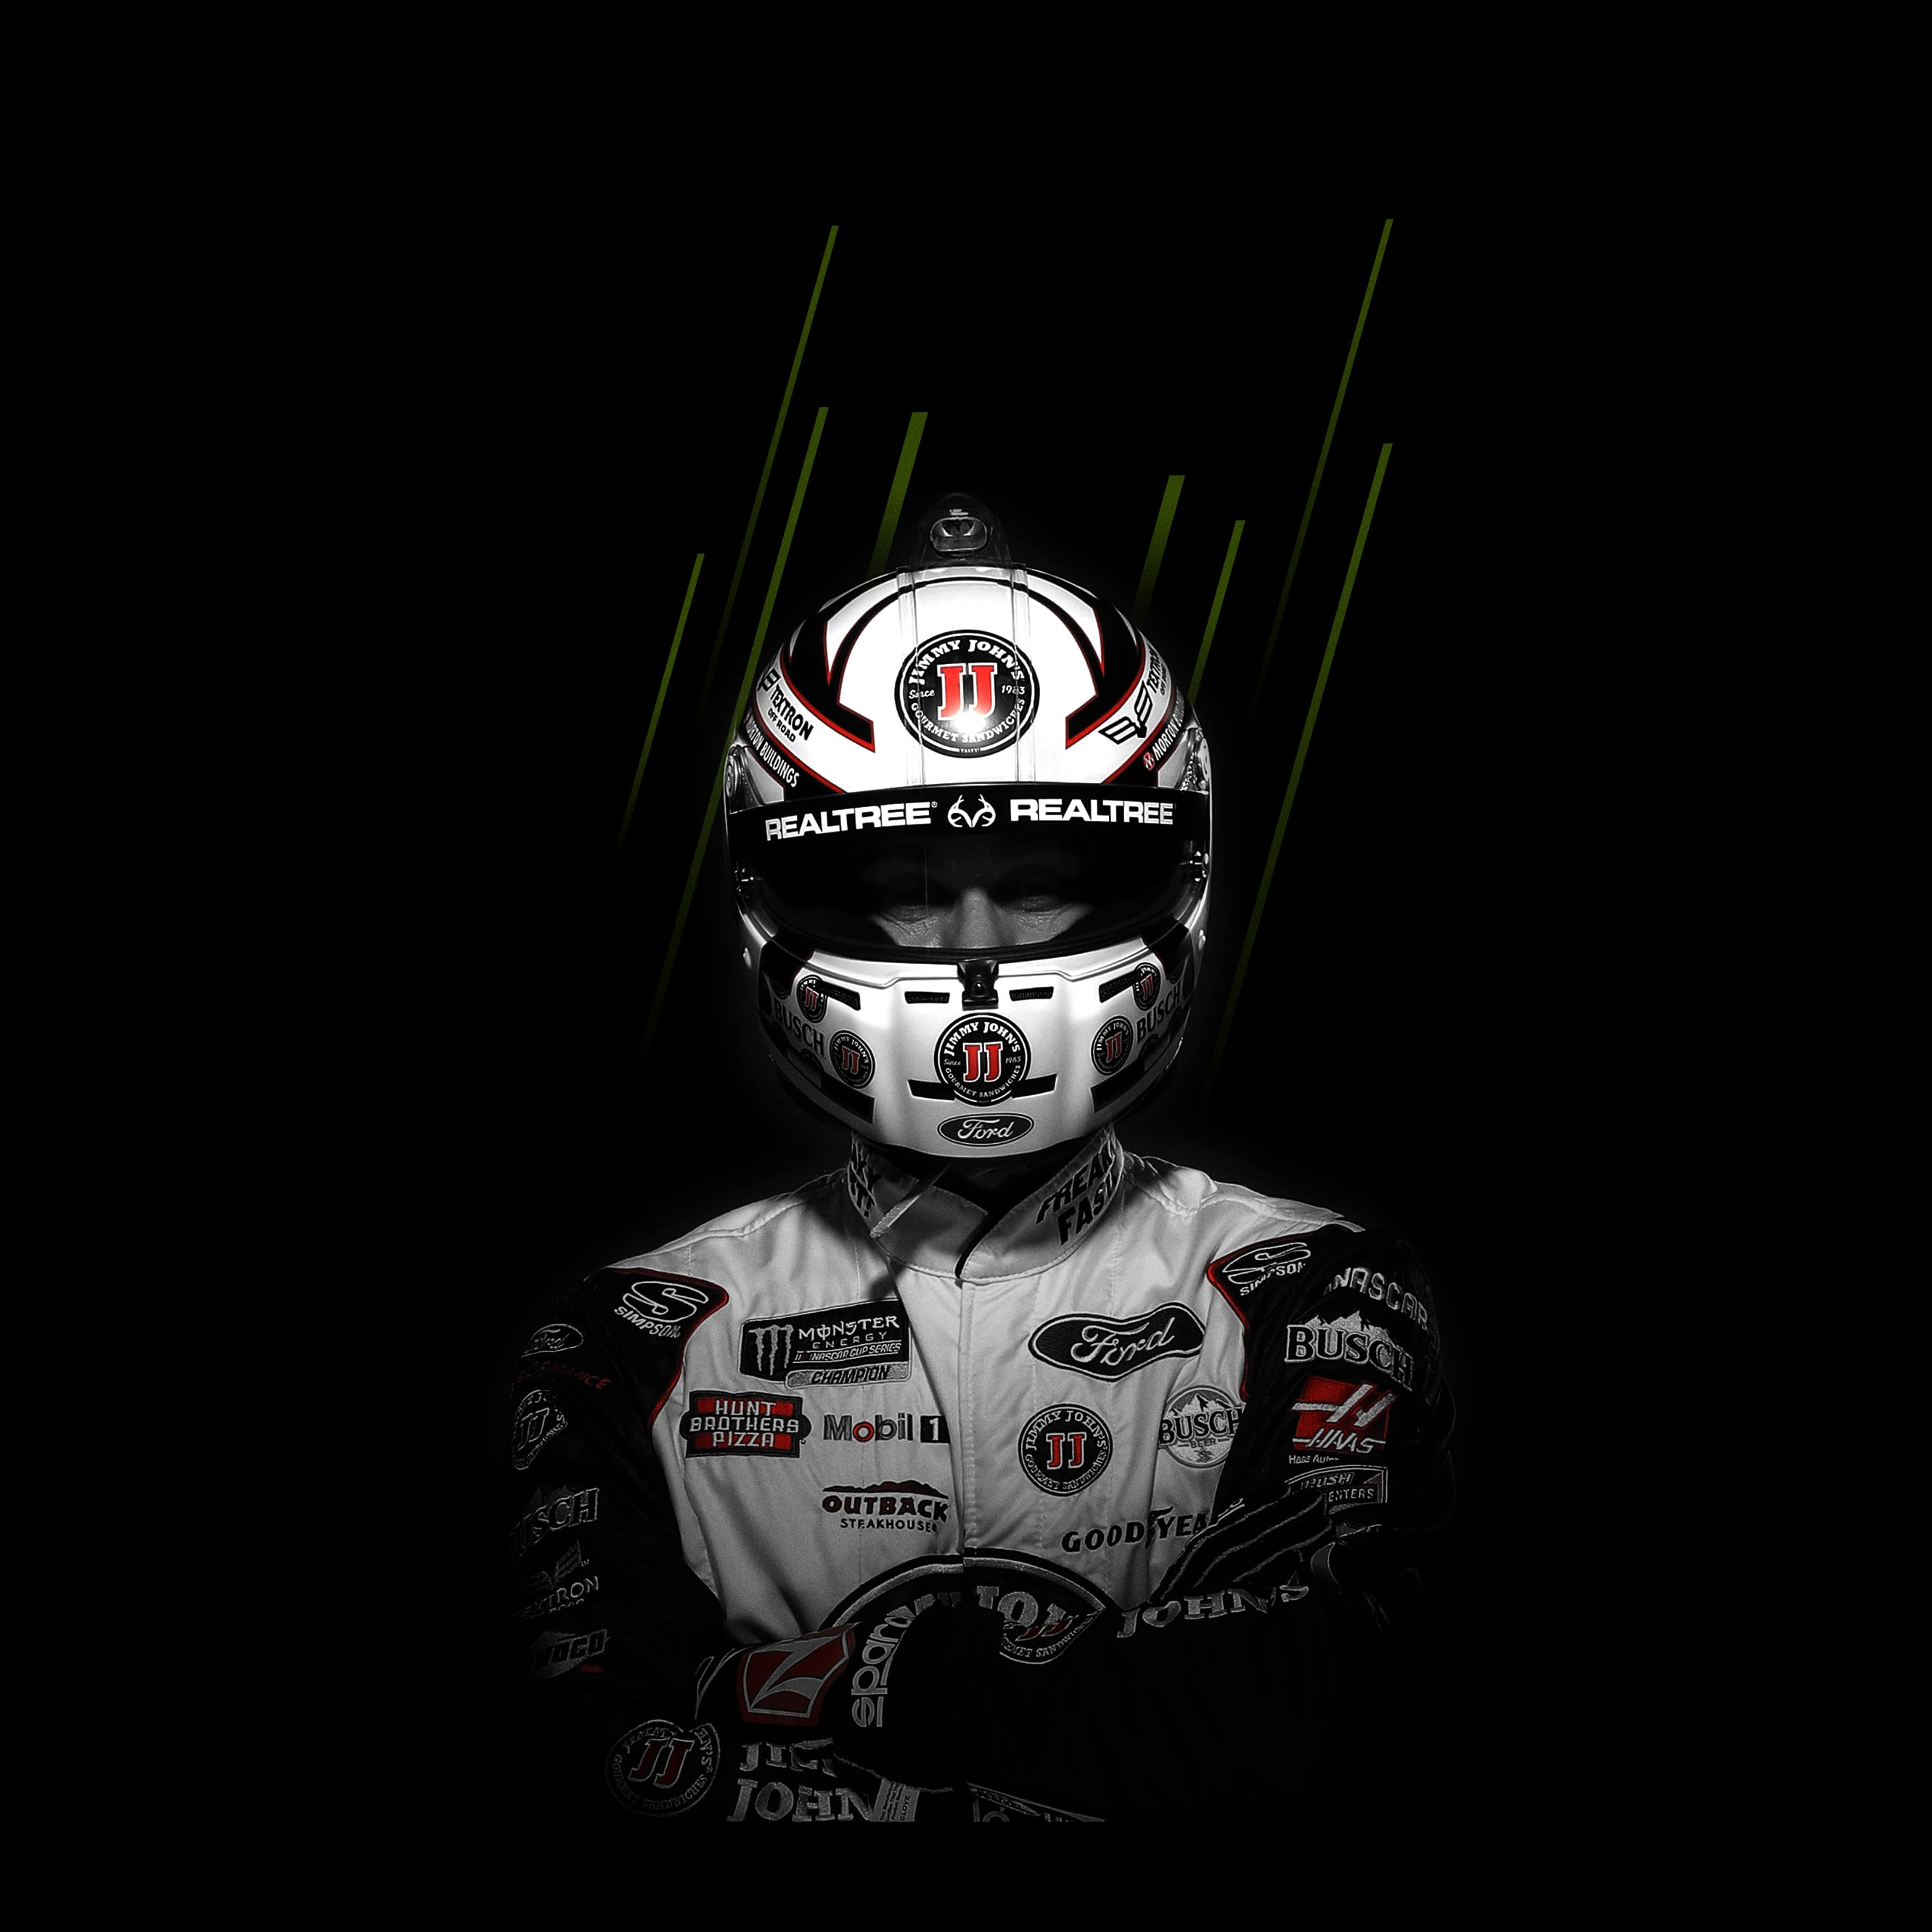 StewartHaas Racing on Twitter Special wallpapers for a special weekend  ahead  httpstcomZ6Wlvfwcz  Twitter